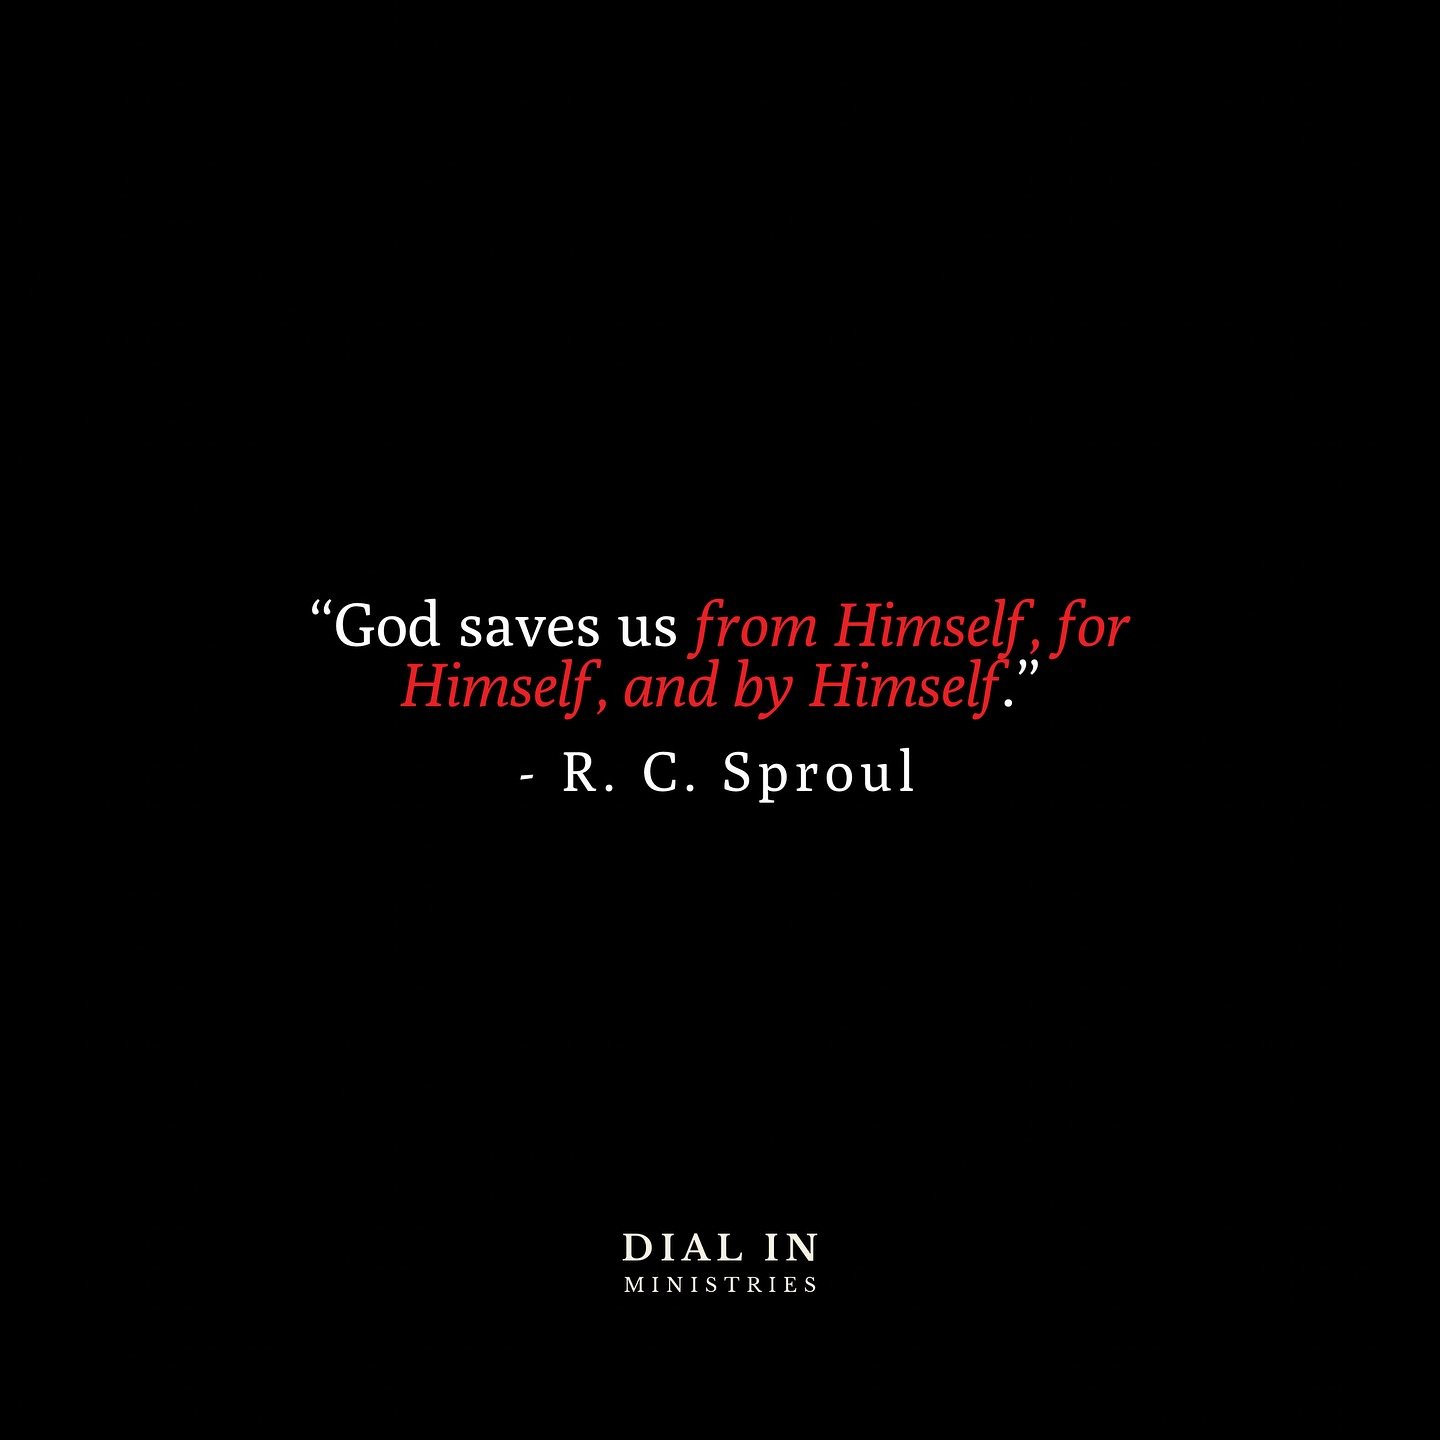 &ldquo;God saves us from Himself, for Himself, and by Himself.&quot;

~ R.C. Sproul